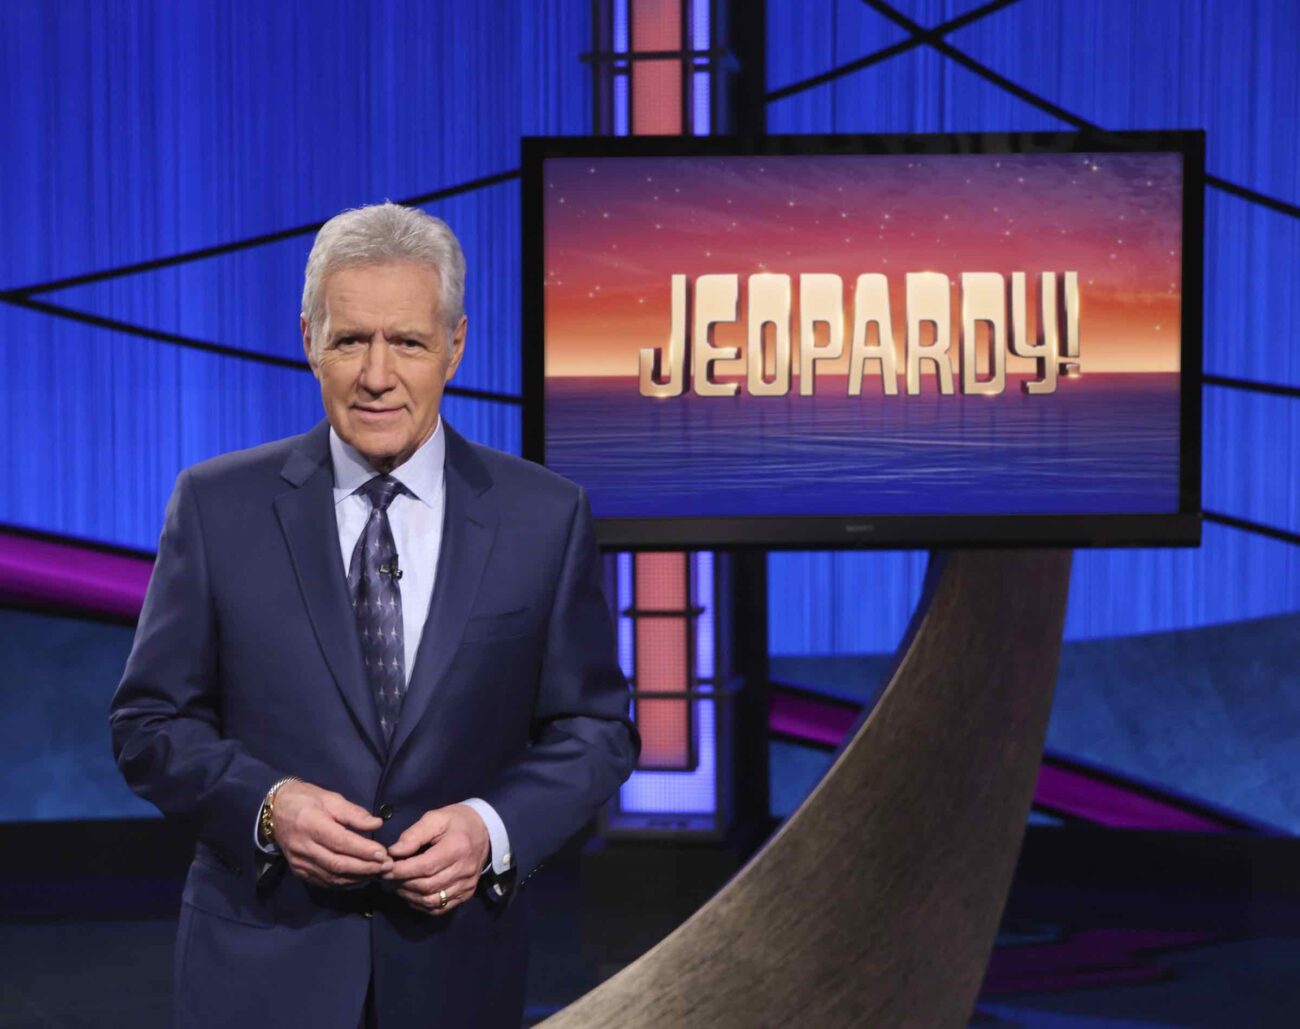 Alex Trebek, the legendary 'Jeopardy' host, is being celebrated on his 81st birthday today. Get ready for Final Jeopardy and dive into his best moments.